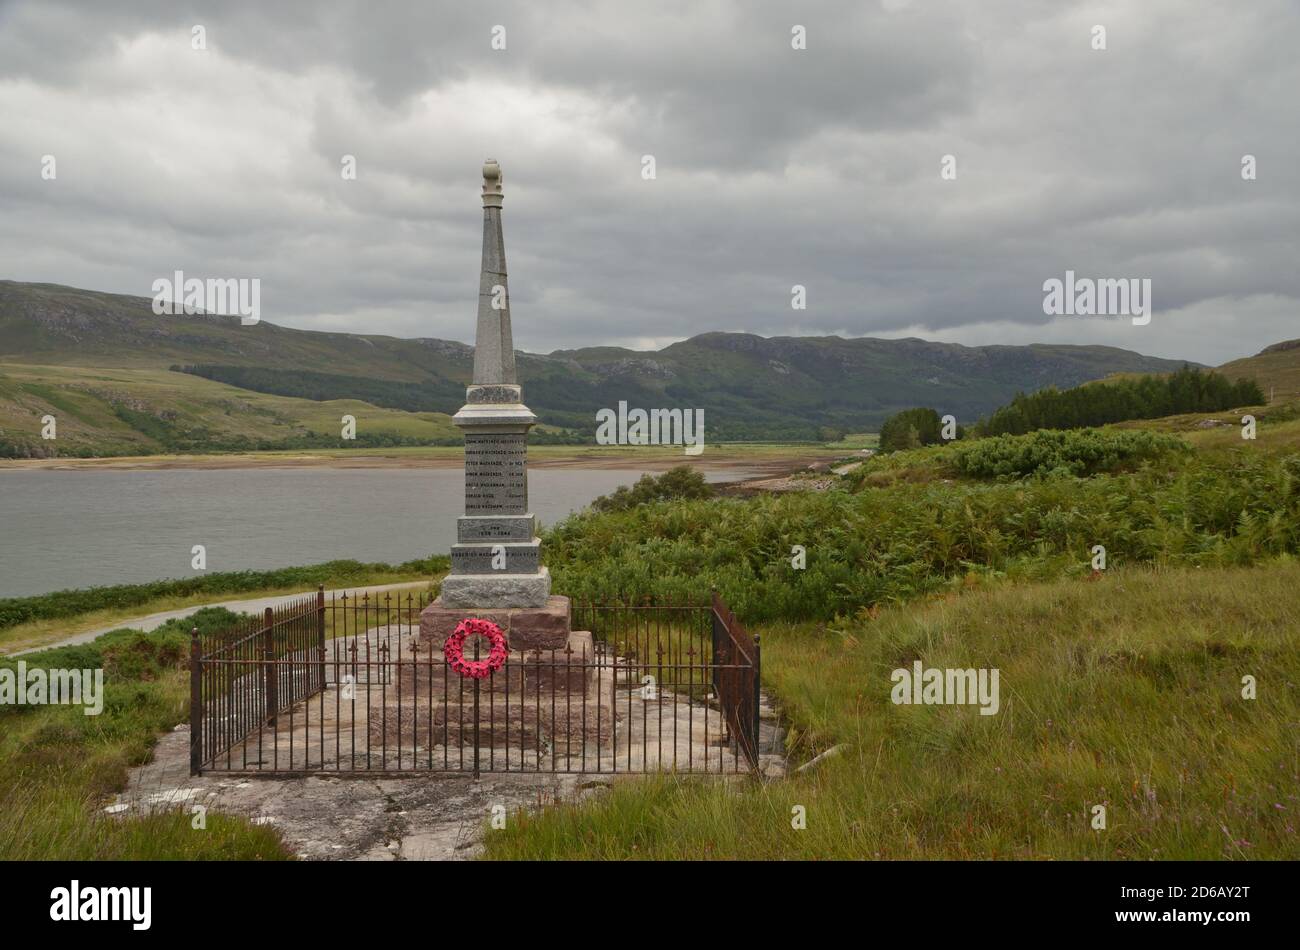 The war memorial at Dundonnell, Scottish Highlands, UK.  Part of the North Coast 500 tourist route. Stock Photo